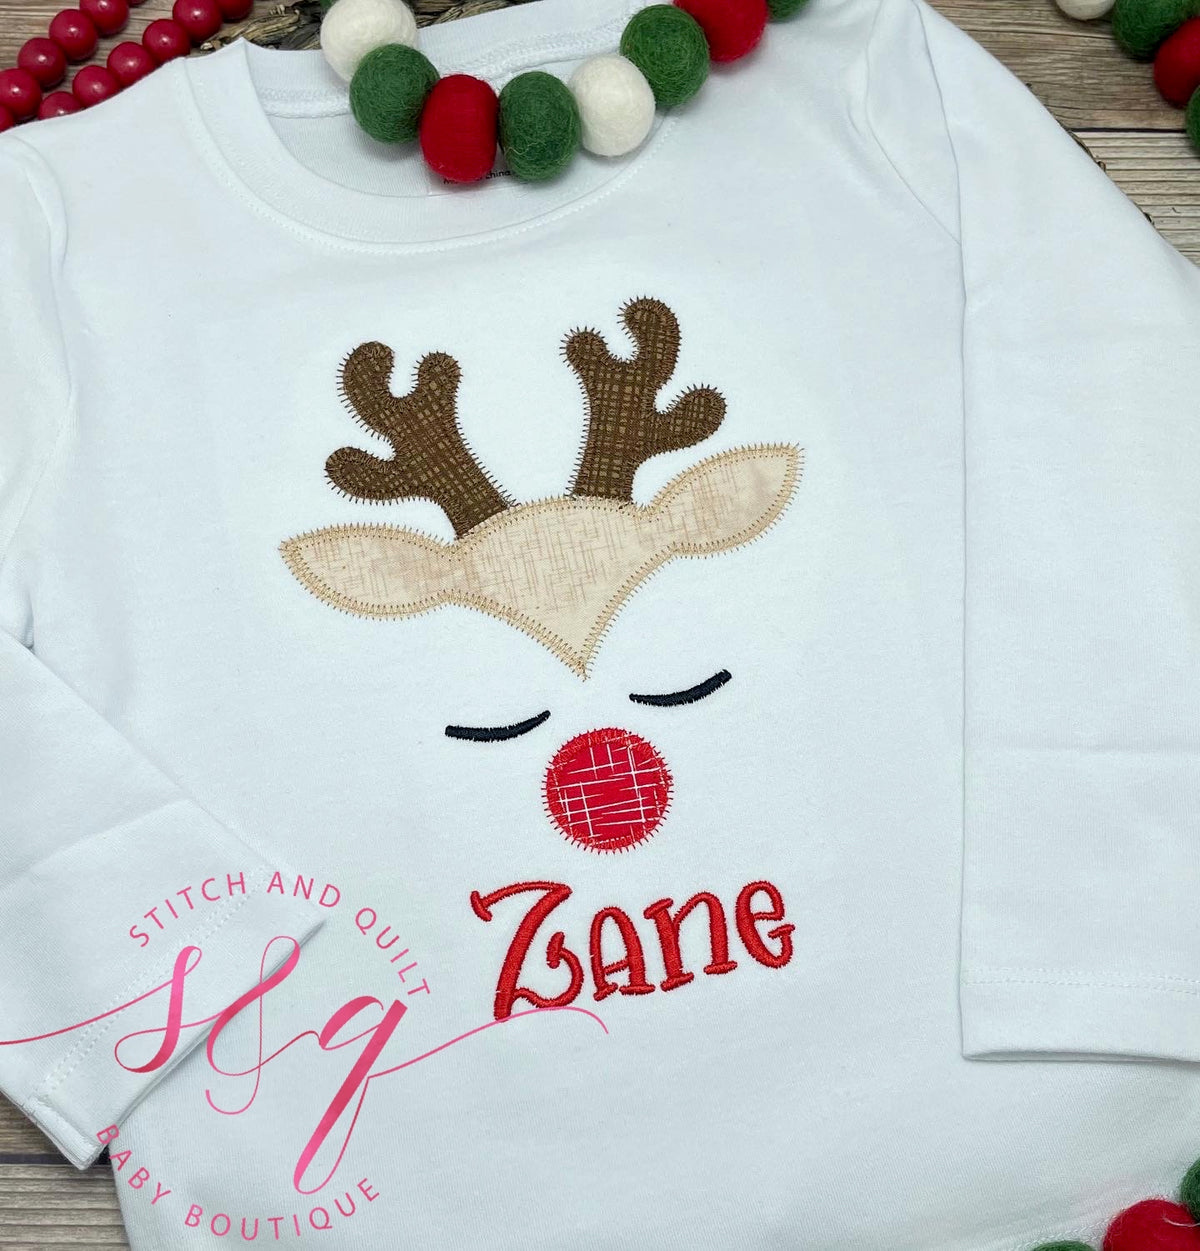 Boy Christmas Outfit, First Christmas, Christmas Reindeer Outfit, Reindeer Outfit, Christmas Boy Reindeer Draft Restock requests: 0